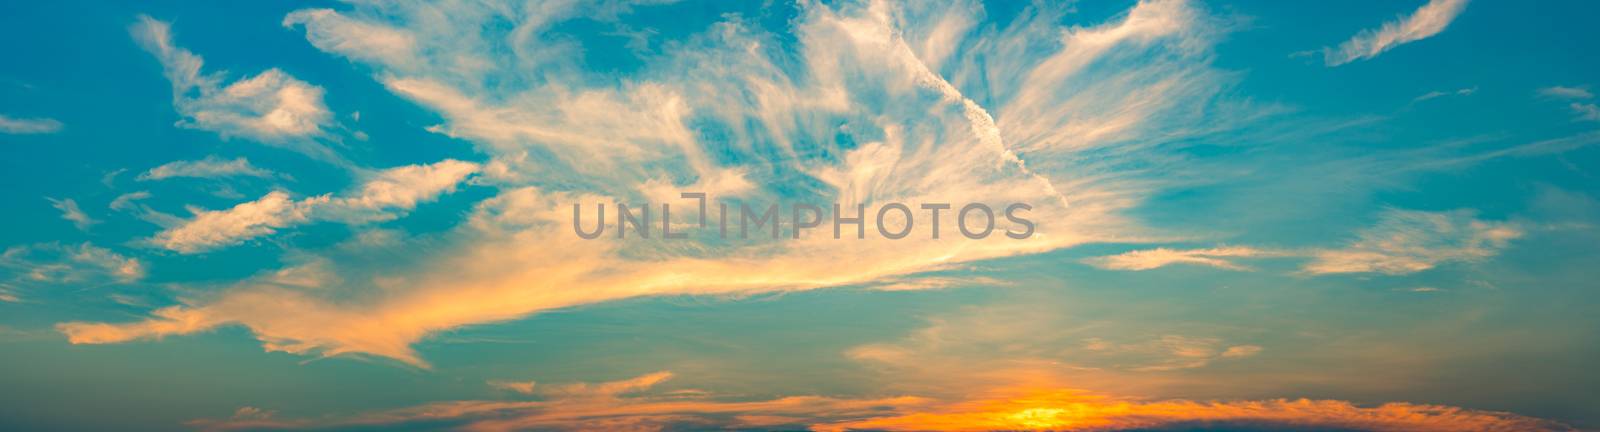 Beautiful blue and golden sky and clouds abstract background. White and golden clouds on sunset sky. Warm weather background. Art picture of sky at sunset. Sunset and fluffy clouds for inspiration.